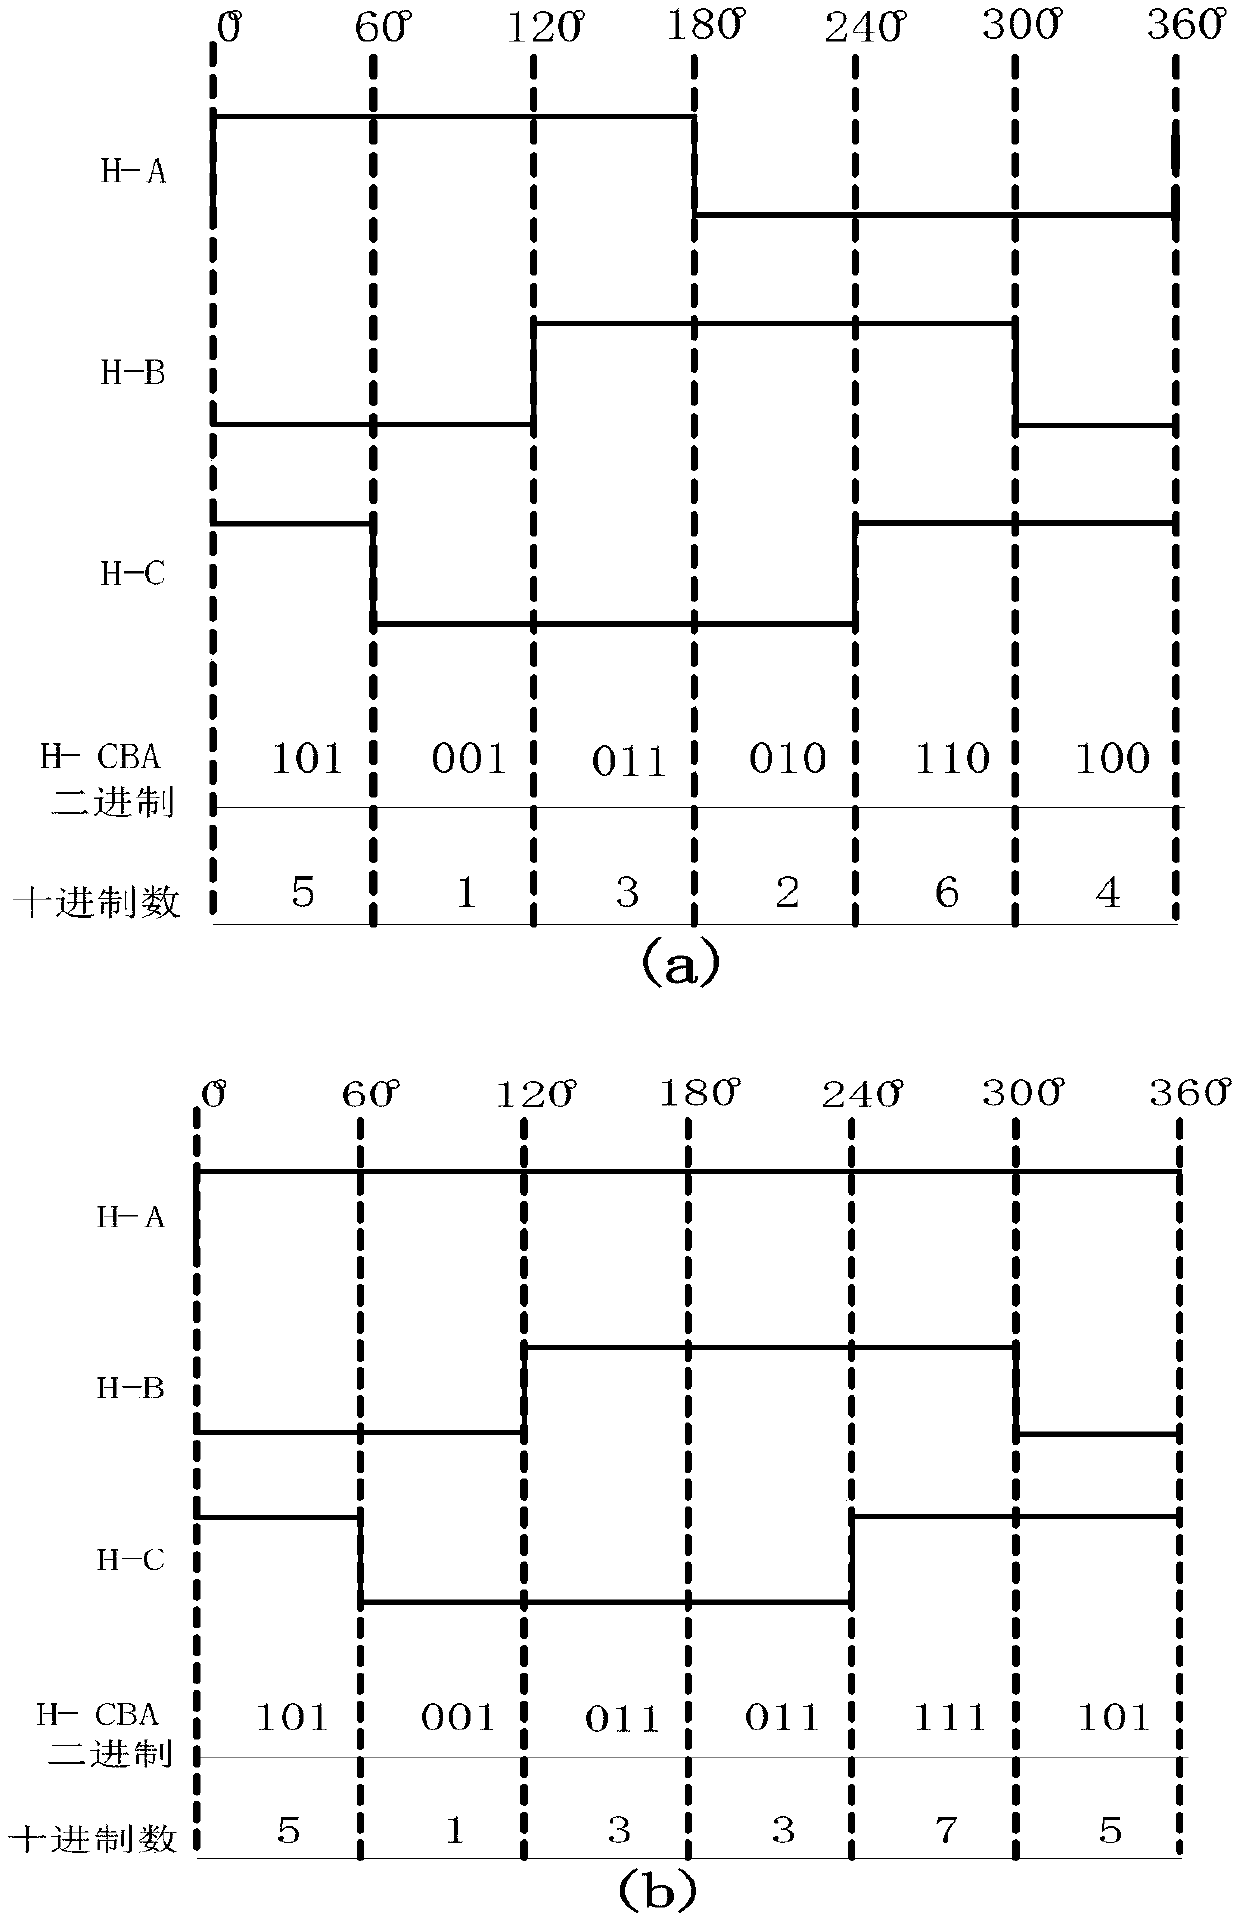 Fault-tolerant control method and system for single-phase Hall faults of brushless direct-current motor